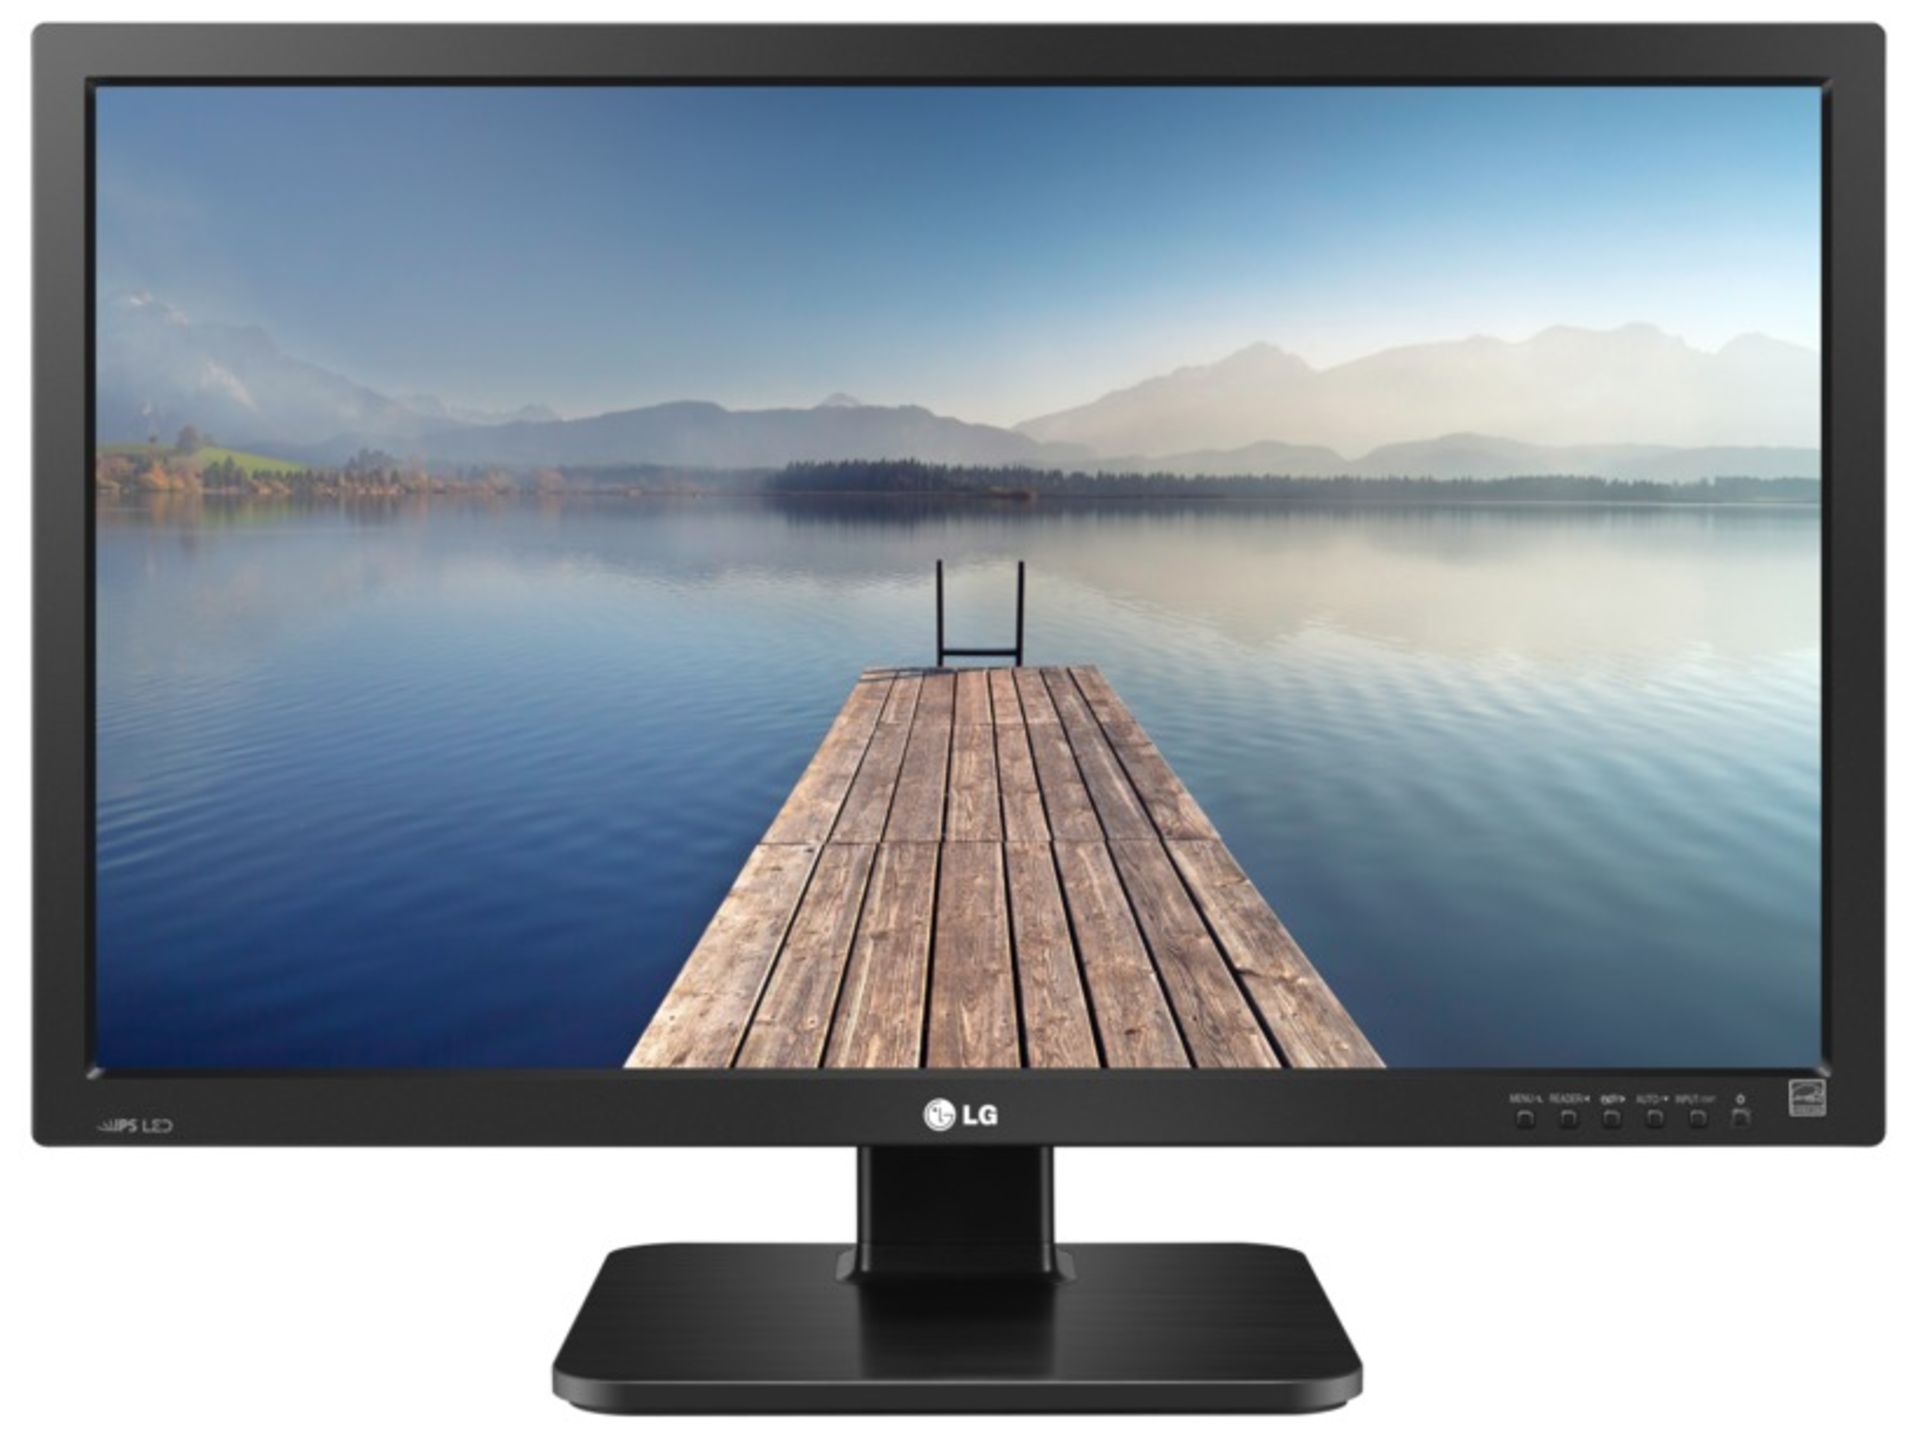 V Grade A LG 24 Inch FULL HD IPS LED MONITOR WITH SPEAKERS - D-SUB, DVI-D, HDMI, DISPLAY PORT